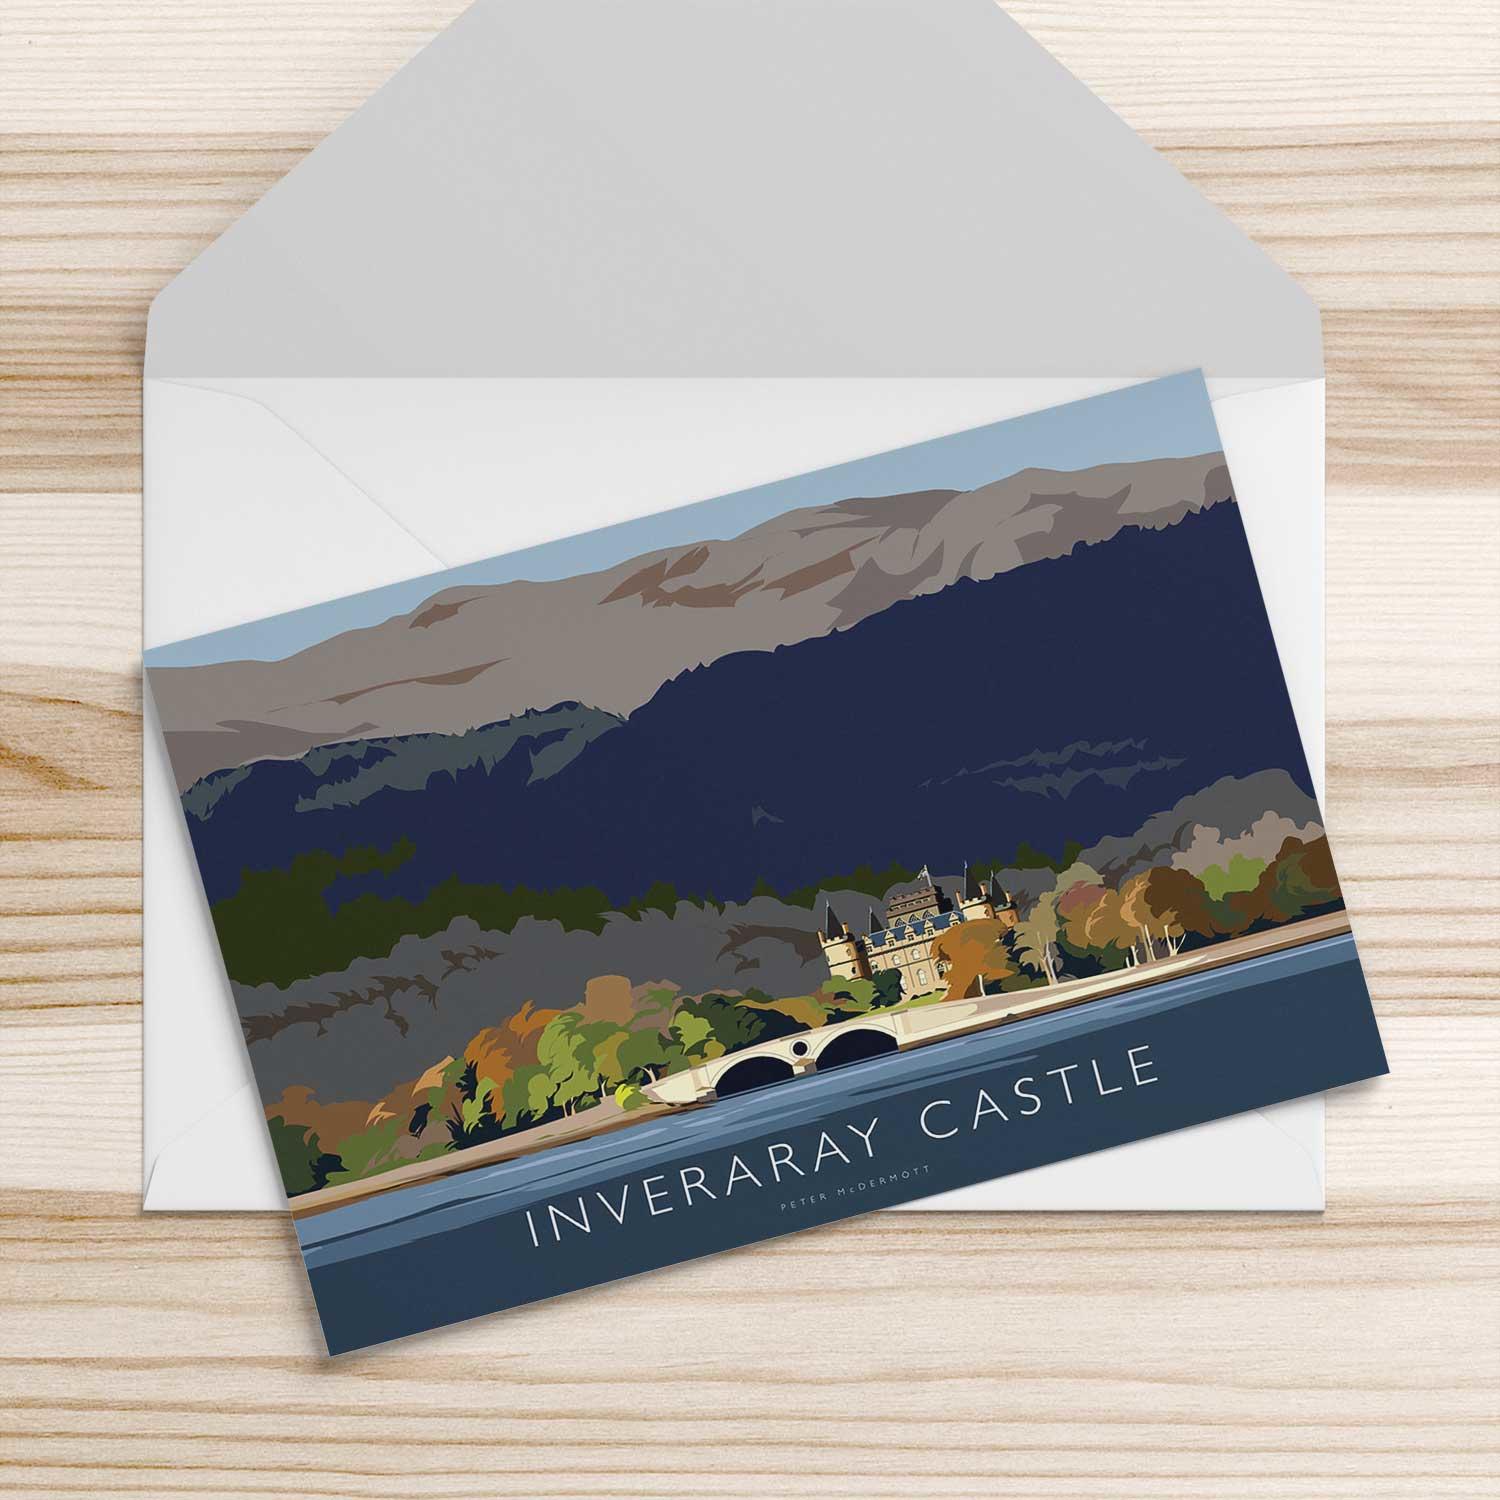 Inveraray Castle Greeting Card from an original painting by artist Peter McDermott